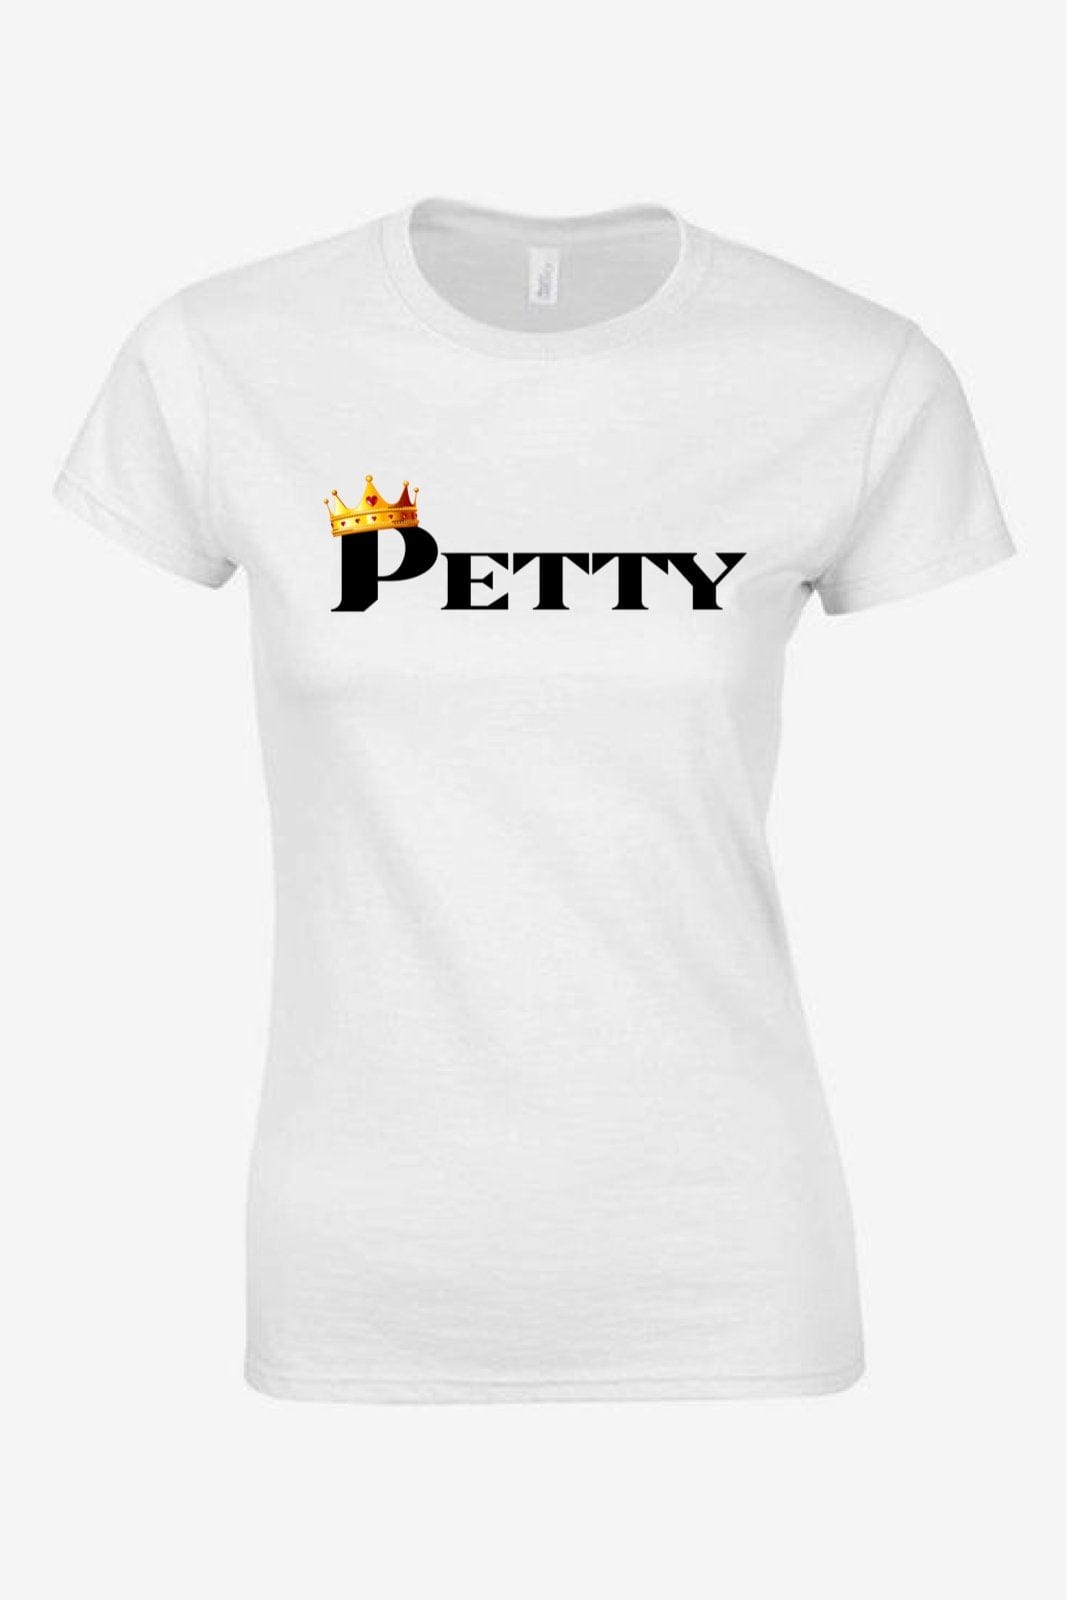 InsensitiviTees Shirts S / White Petty Queen